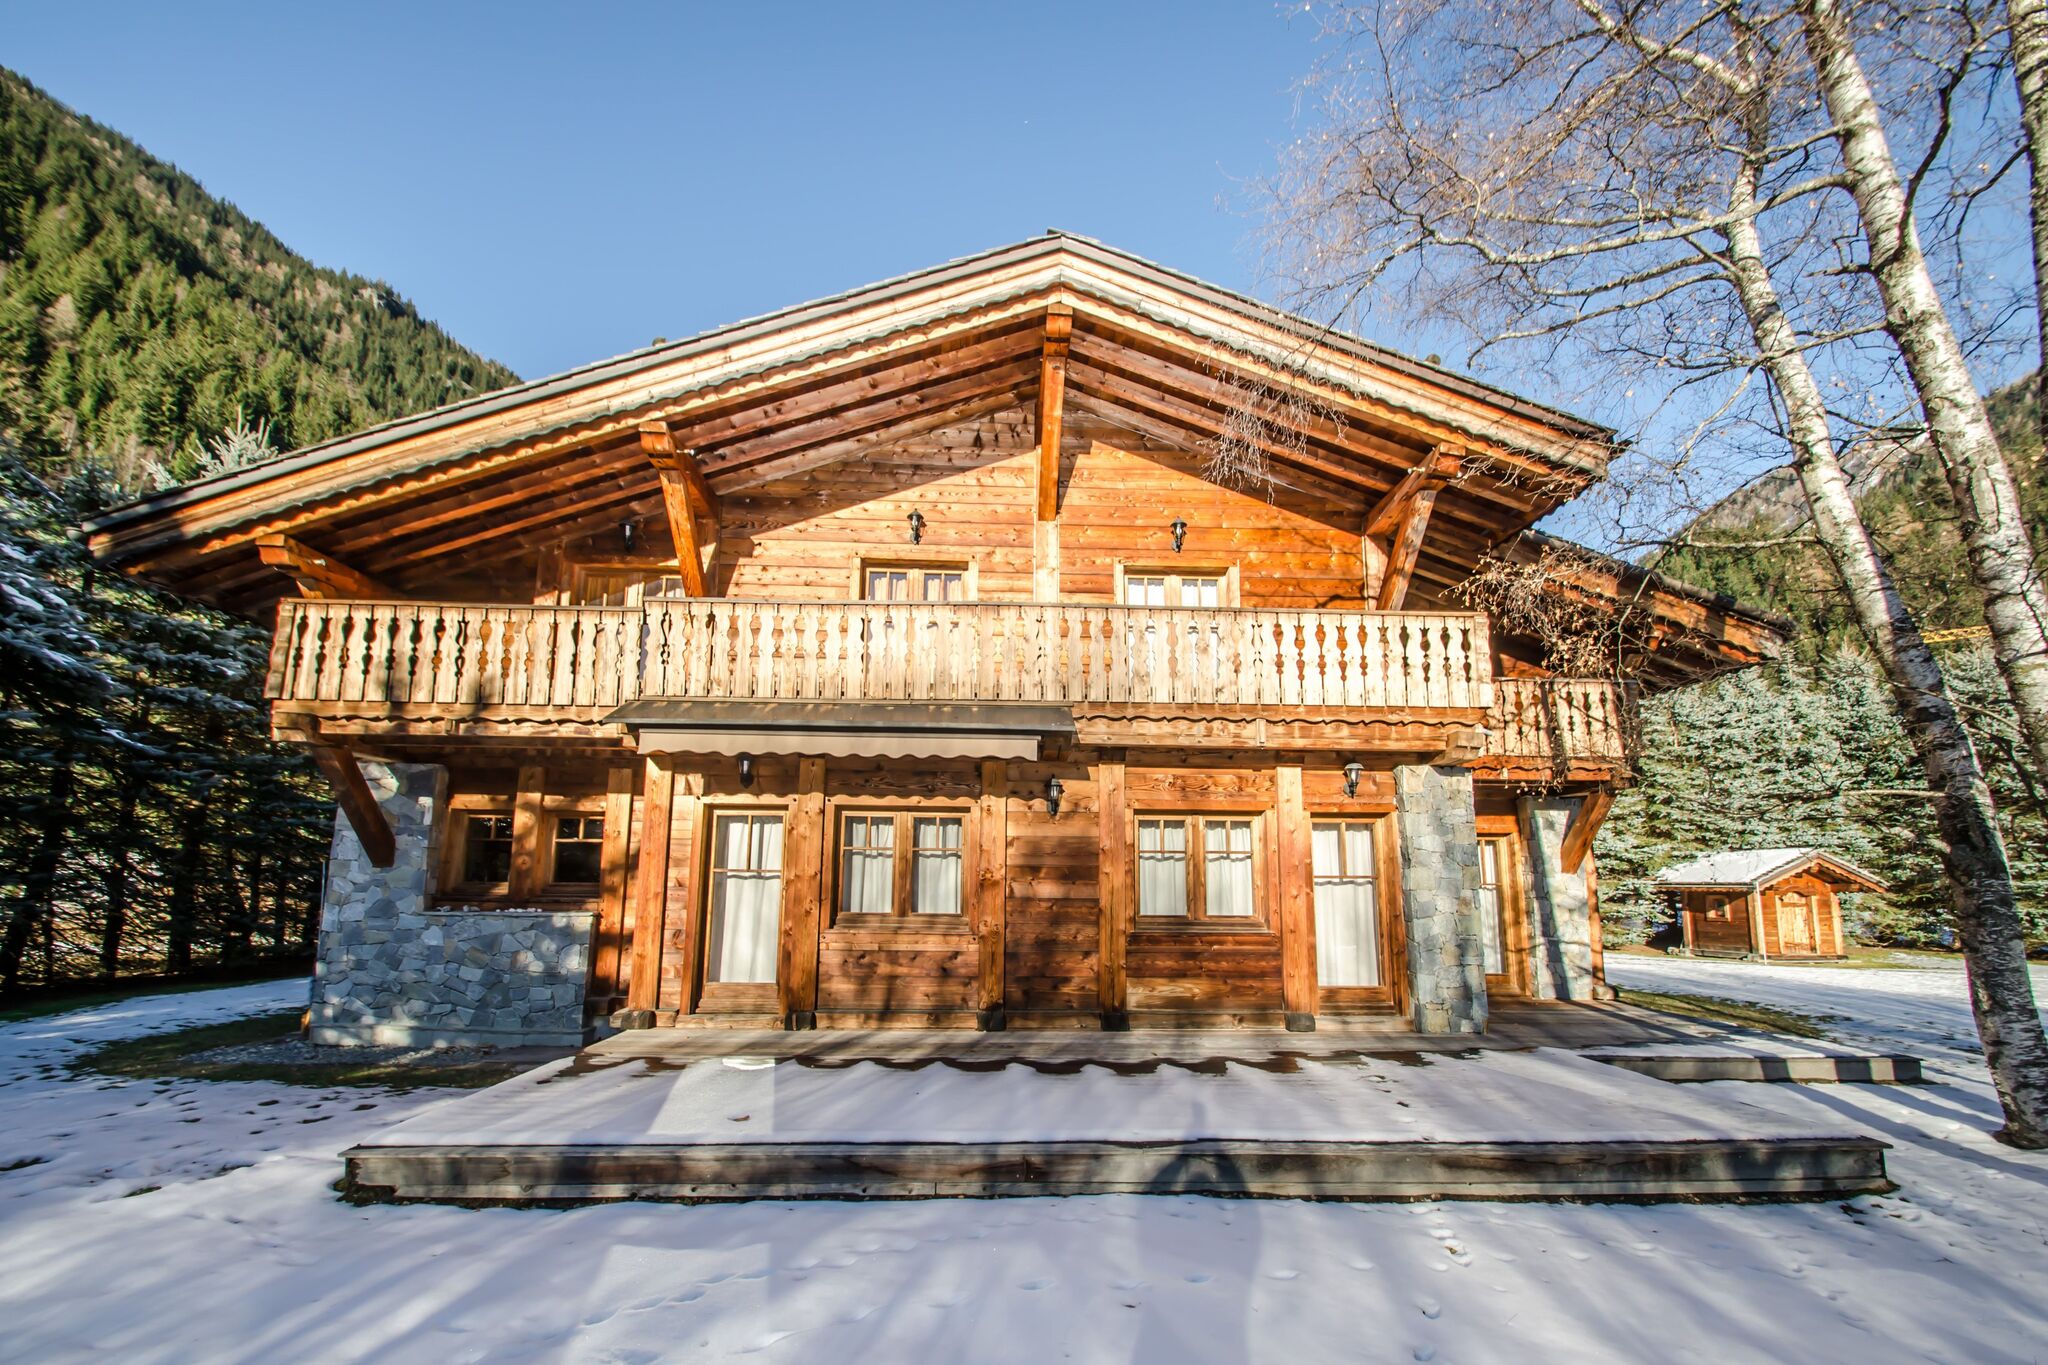 Spacious chalet that will delight large families